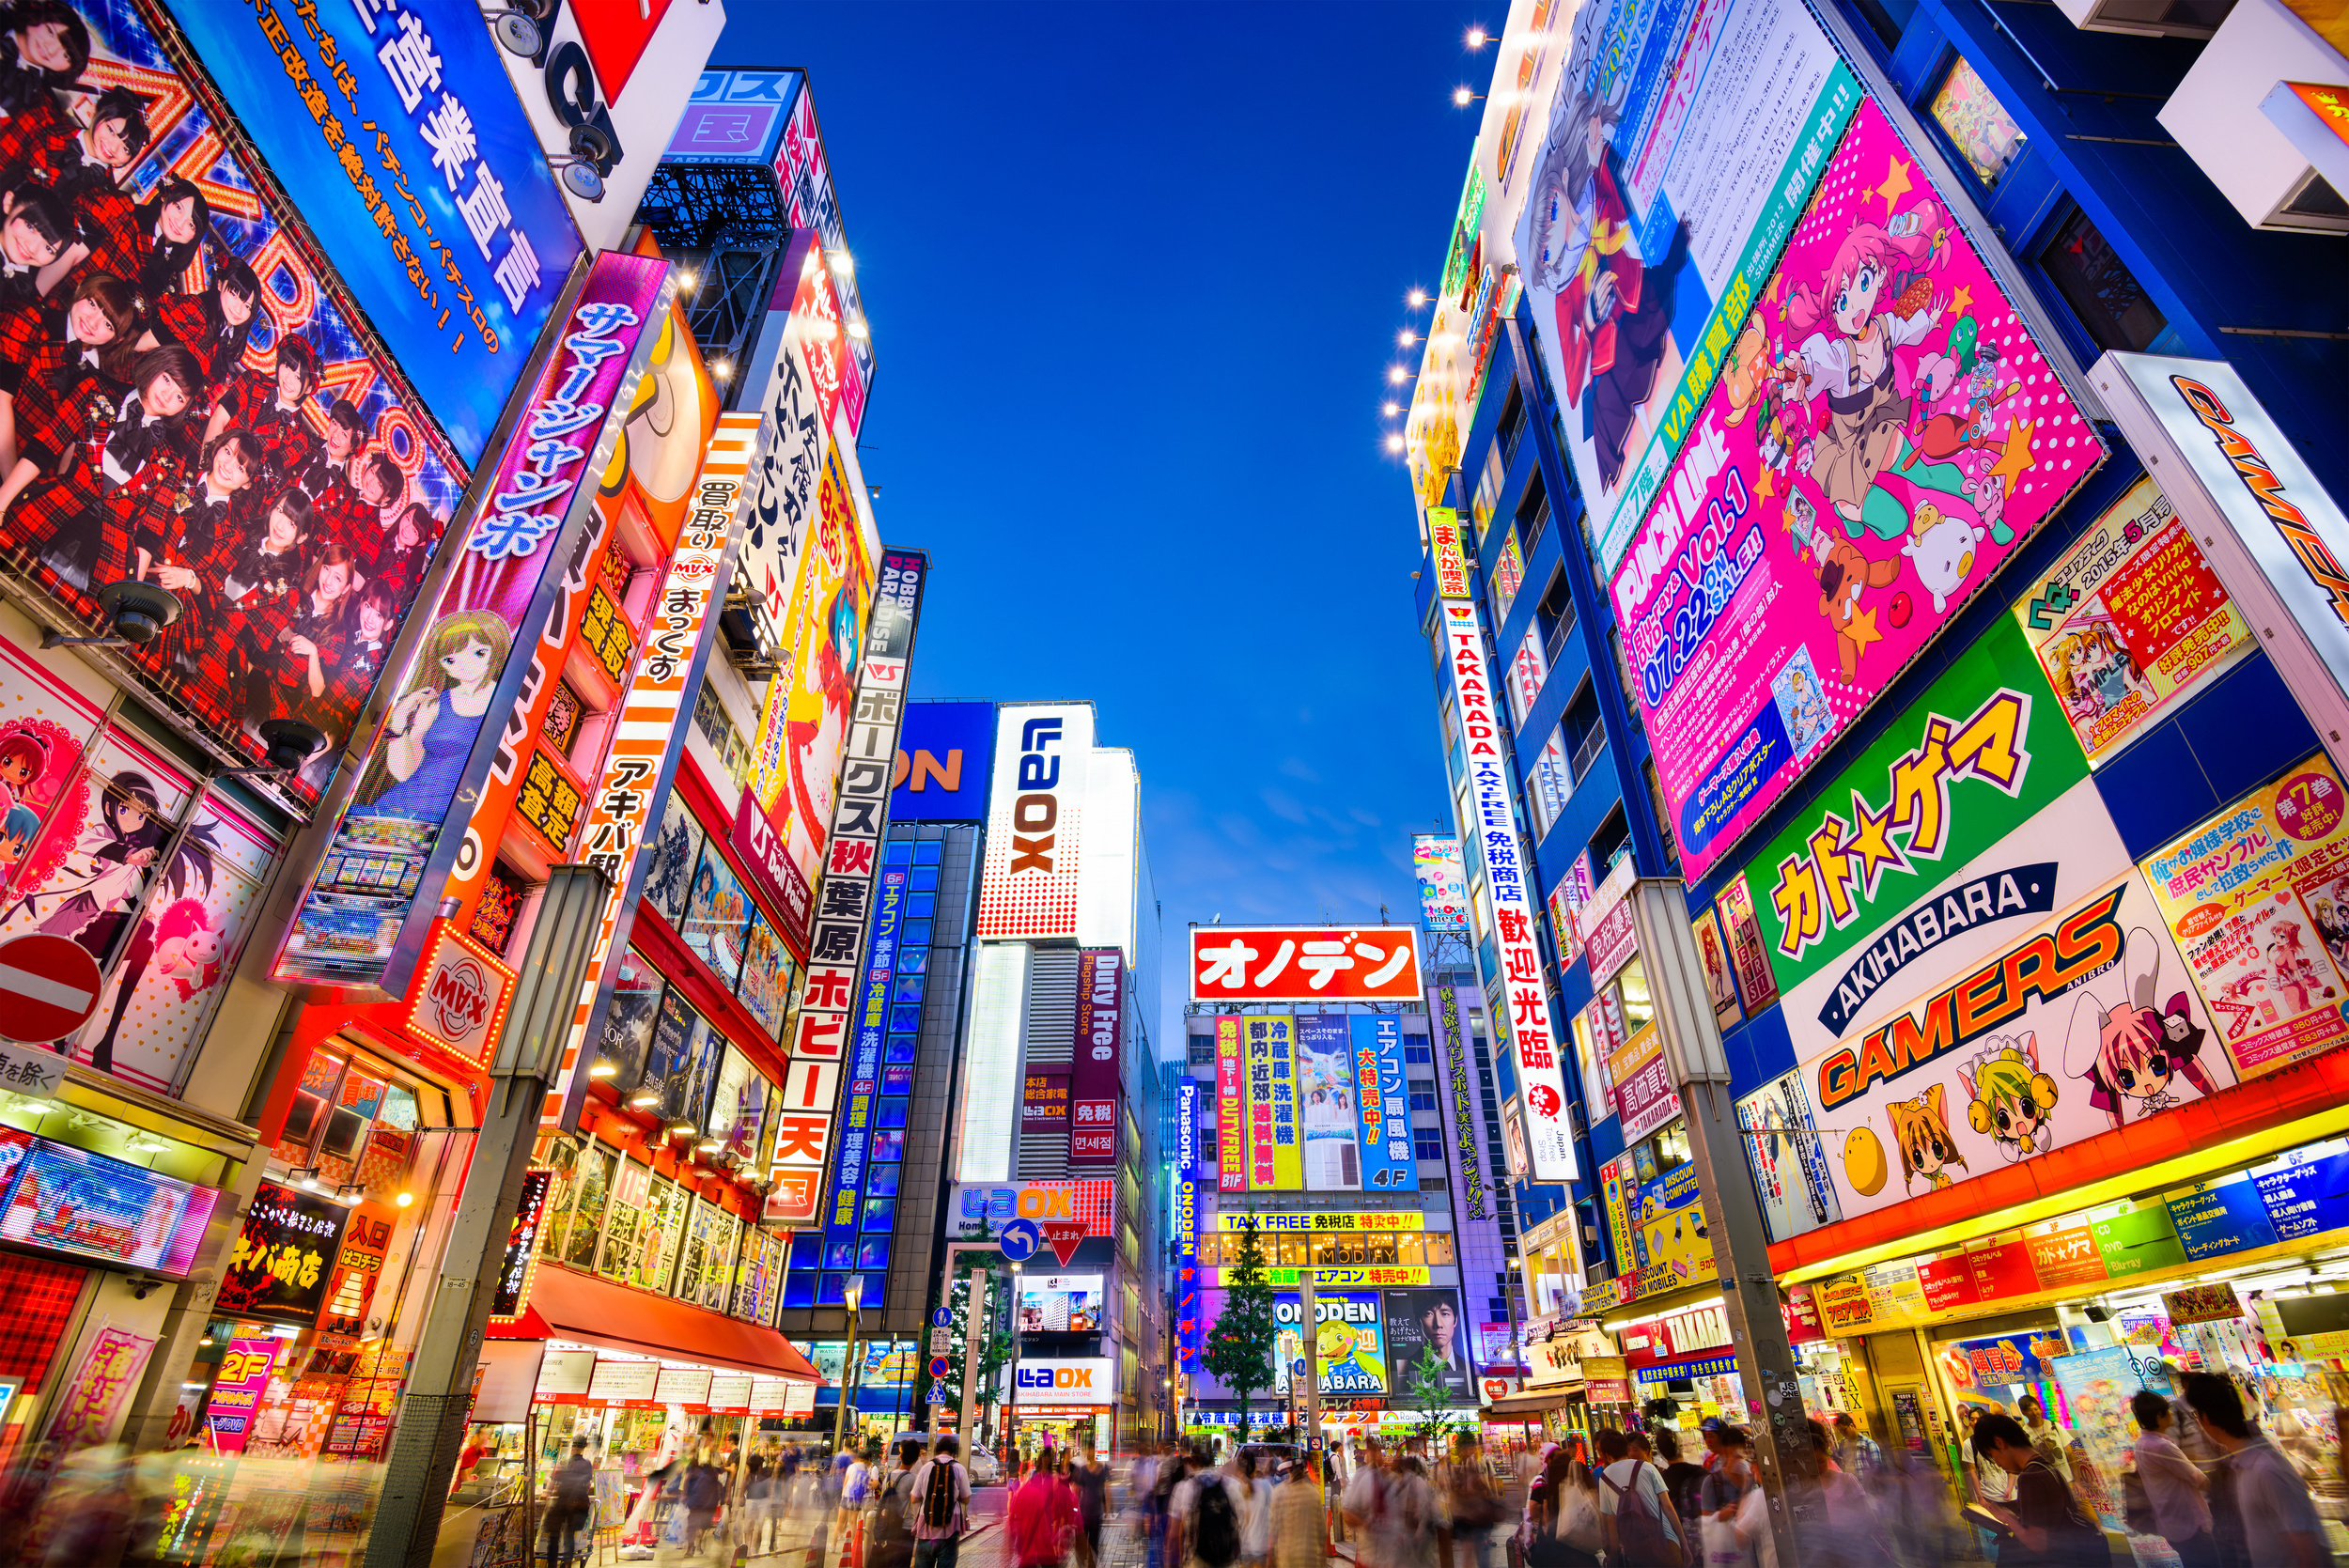 <p>There is no place on earth like Tokyo. Japan's capital city is home to nearly 14 million people, and it feels like there are nearly that many options for things to do in this incredible city. There are temples to explore, cultural districts to wander, and of course, so much great food. </p><p><a href='https://www.msn.com/en-us/community/channel/vid-cj9pqbr0vn9in2b6ddcd8sfgpfq6x6utp44fssrv6mc2gtybw0us'>Follow us on MSN to see more of our exclusive lifestyle content.</a></p>